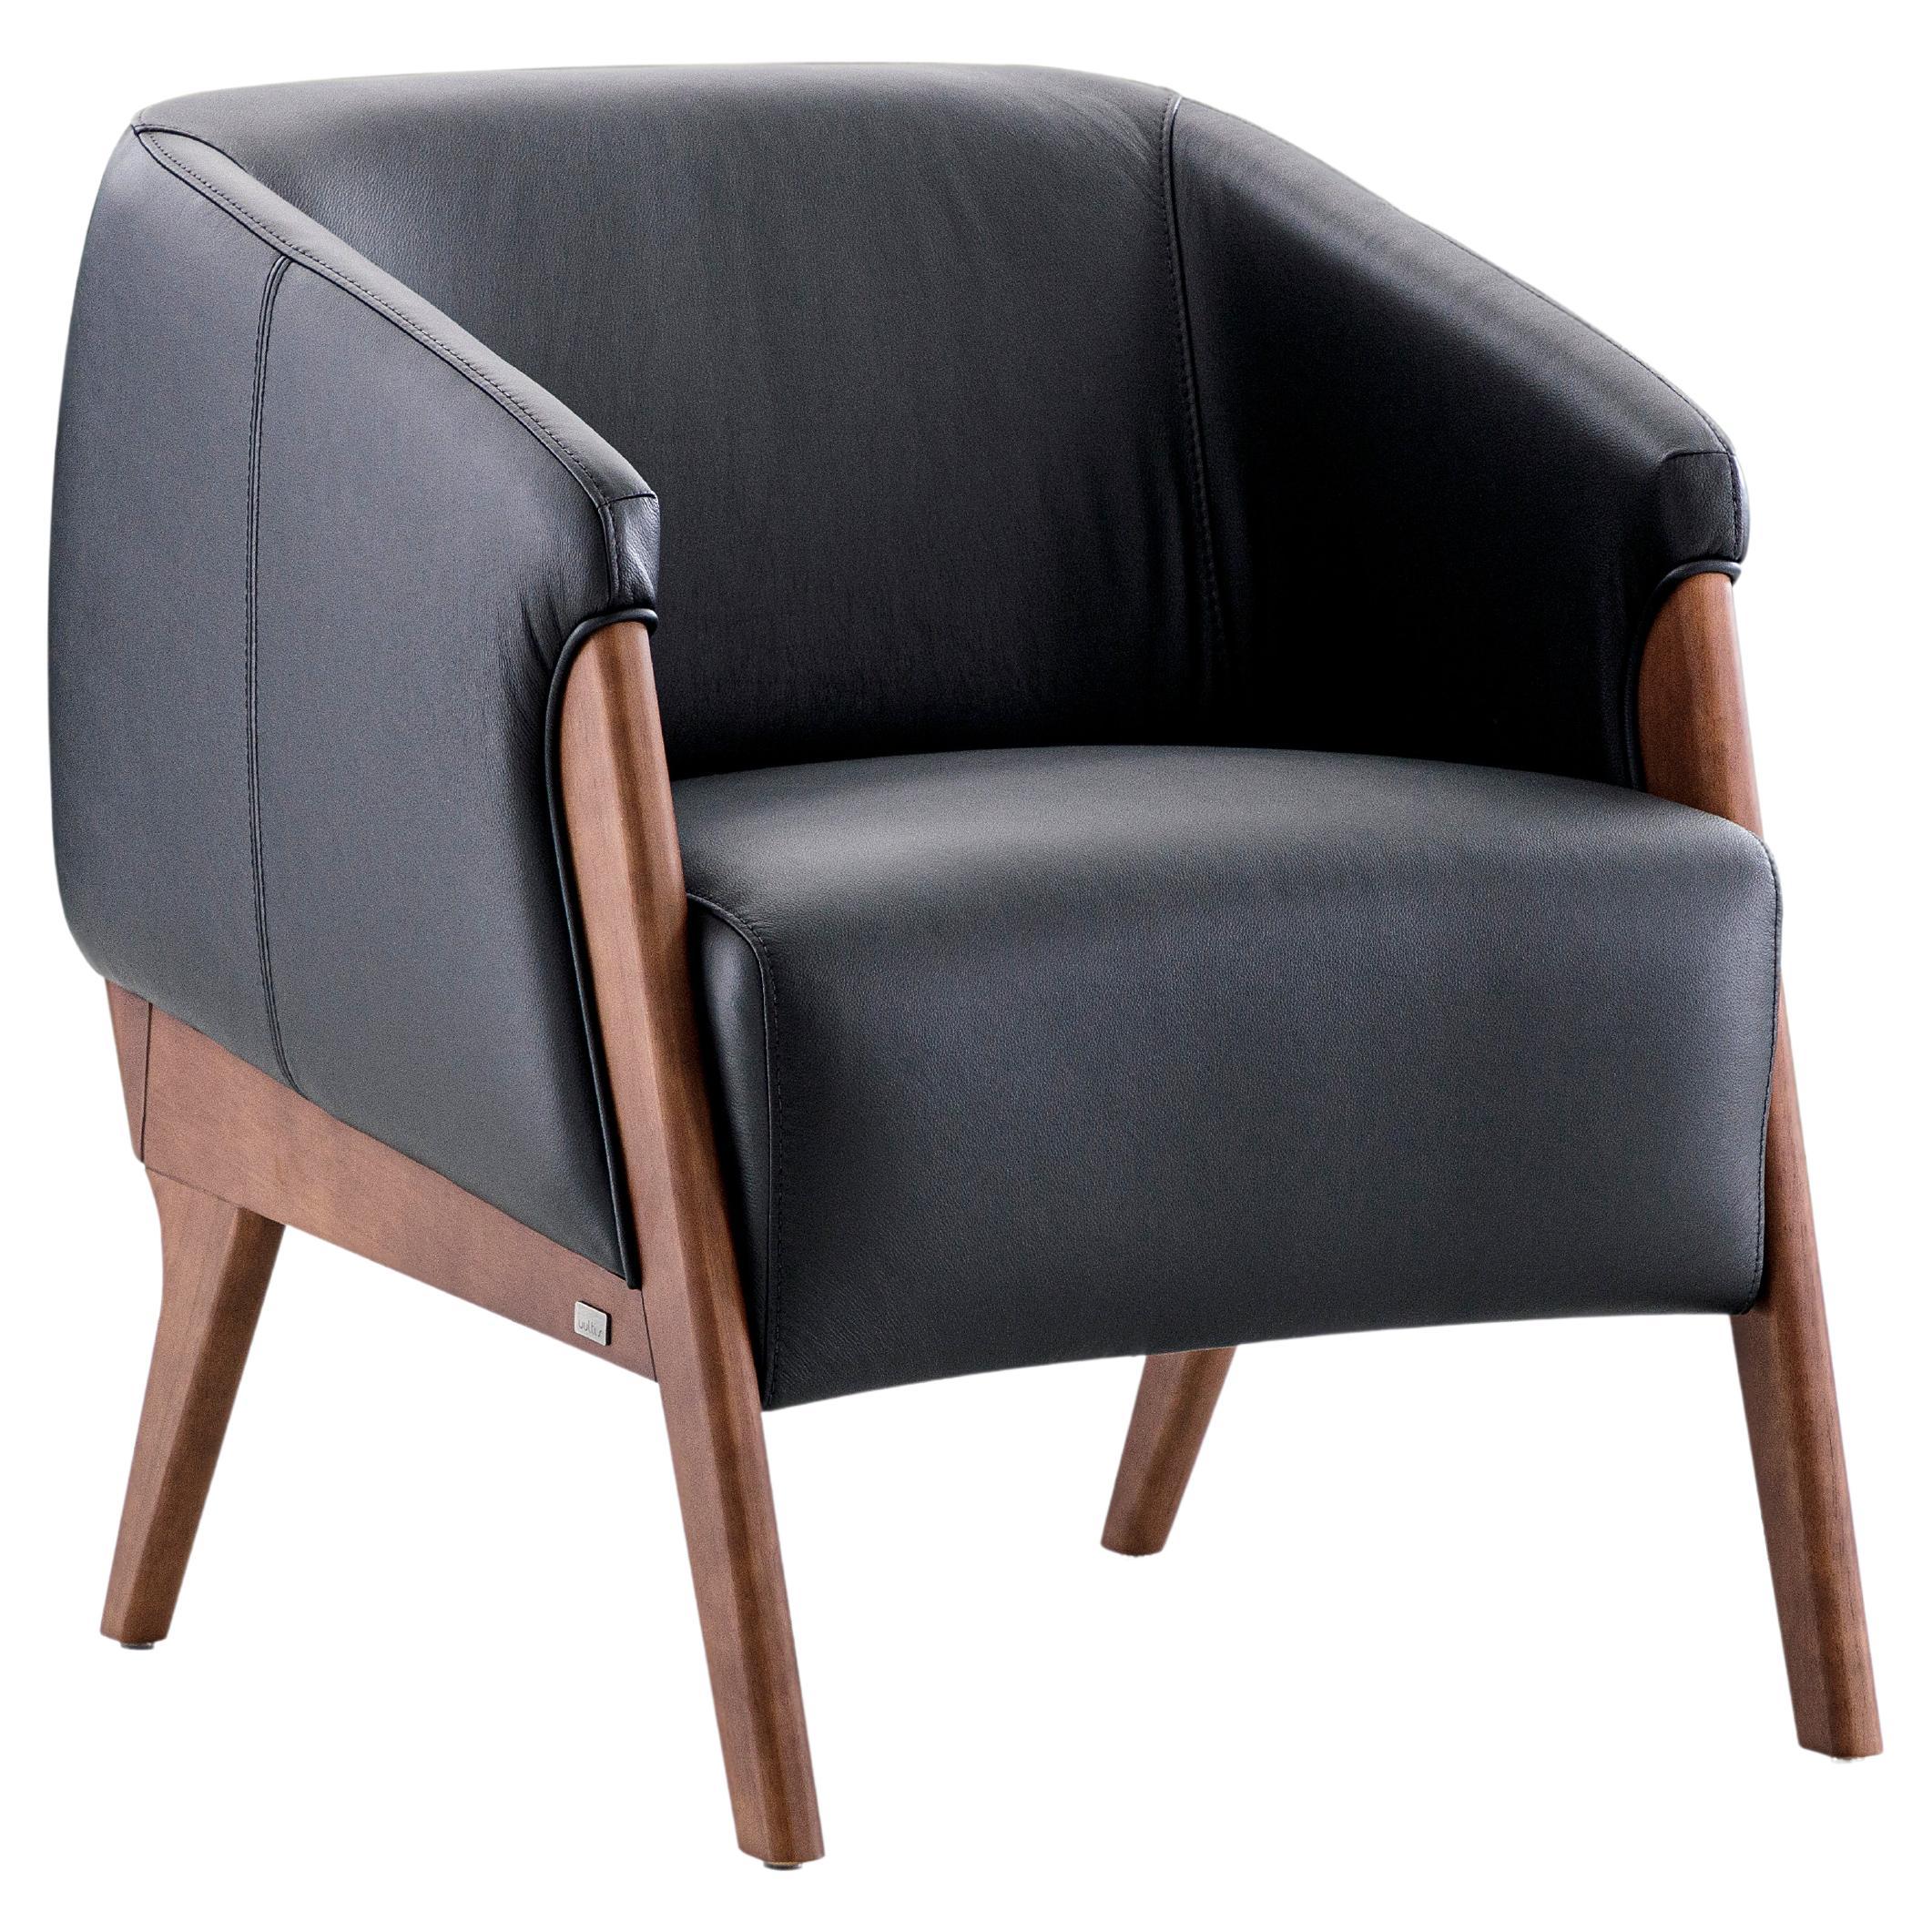 Abra Armchair in Black Leather and Walnut Wood Finish For Sale